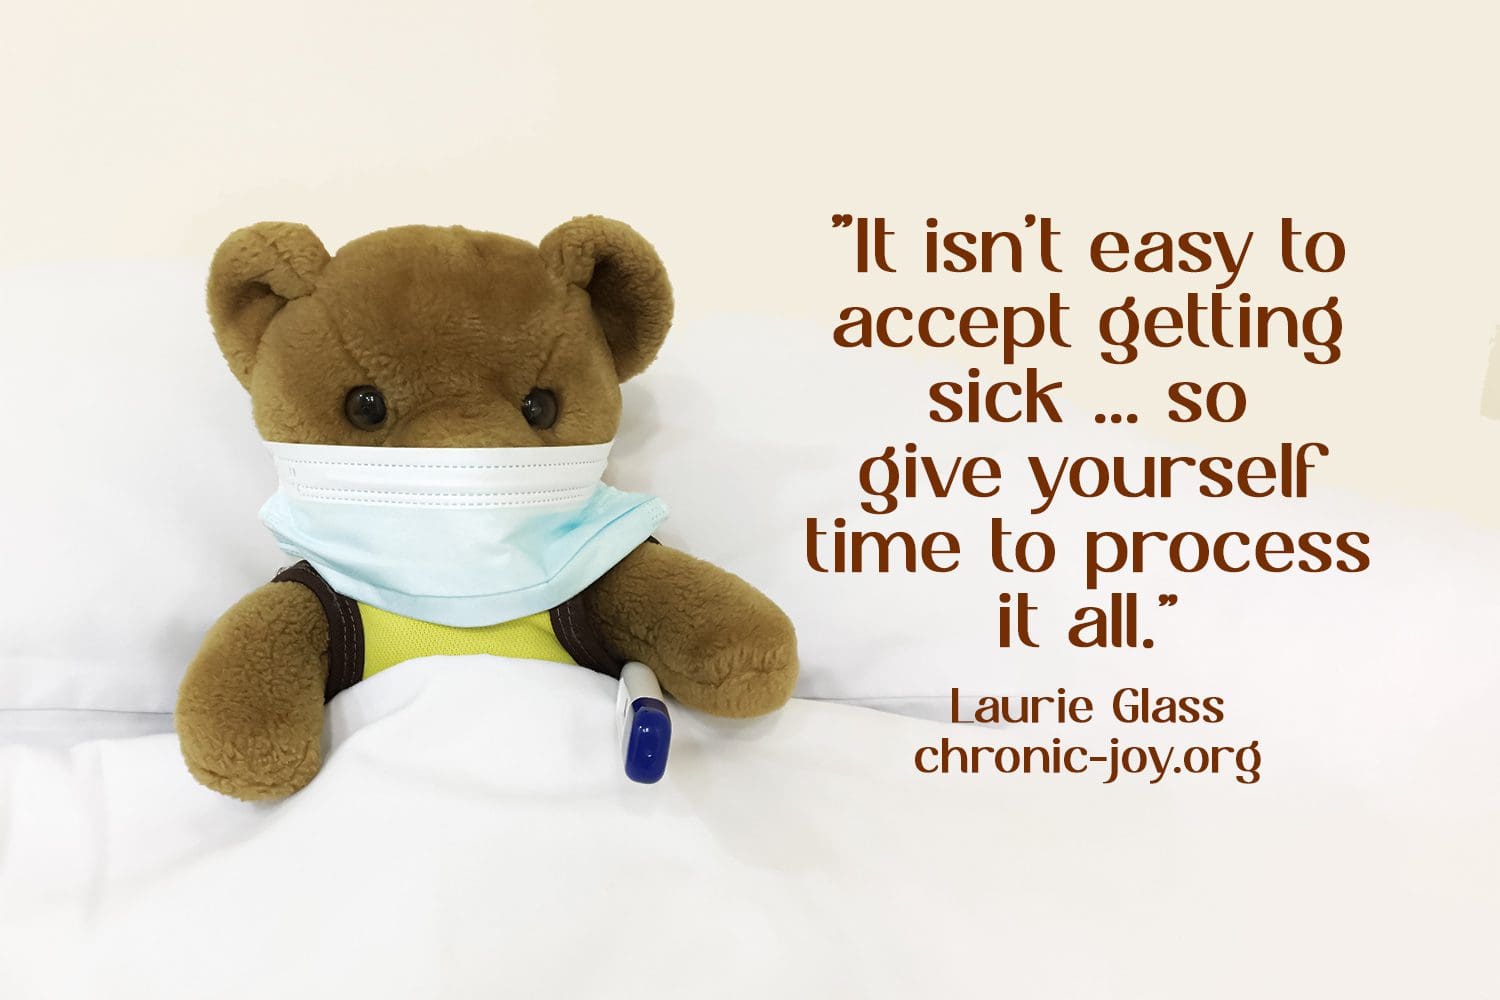 ”It isn’t easy to accept getting sick ... so give yourself time to process it all.” Laurie Glass